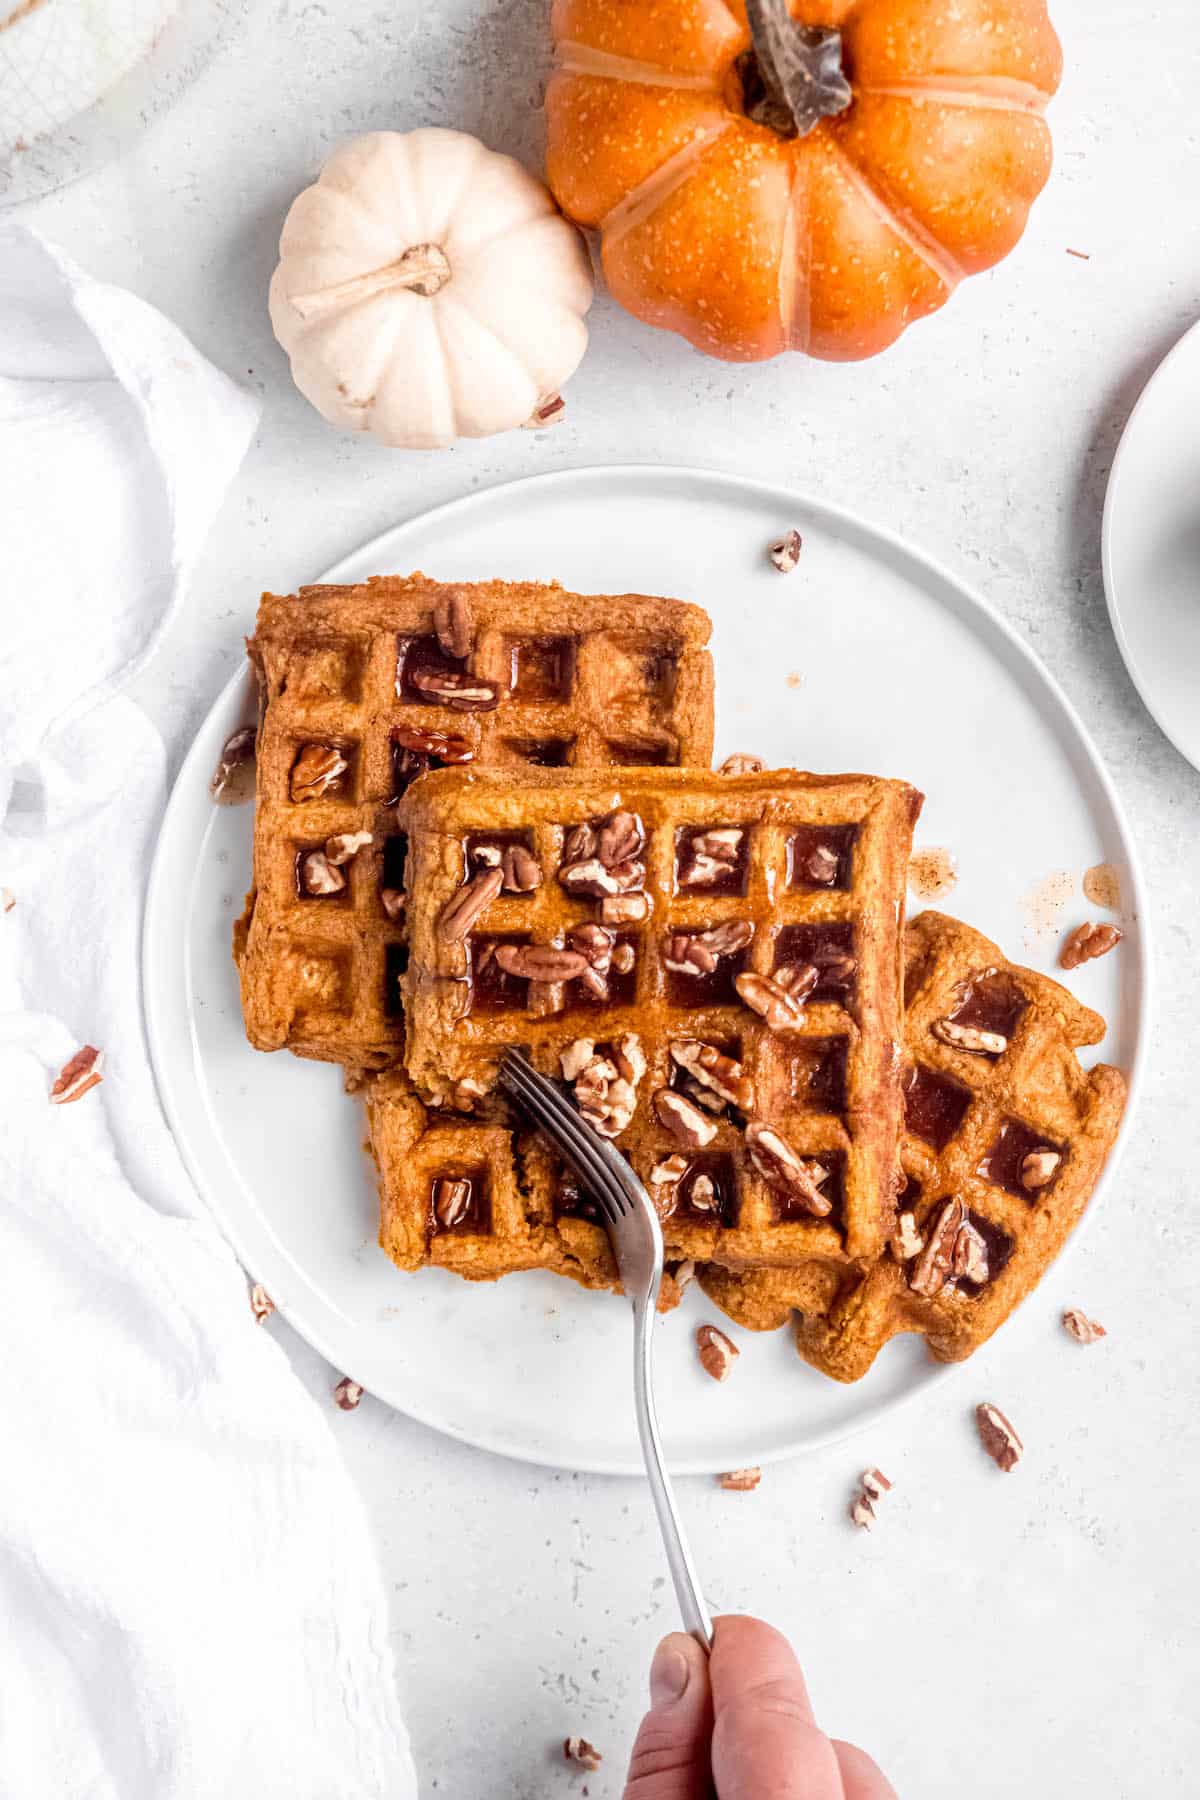 hero shot of a hand using a silver fork to cut a bite out of the plate of pumpkin pecan waffles.